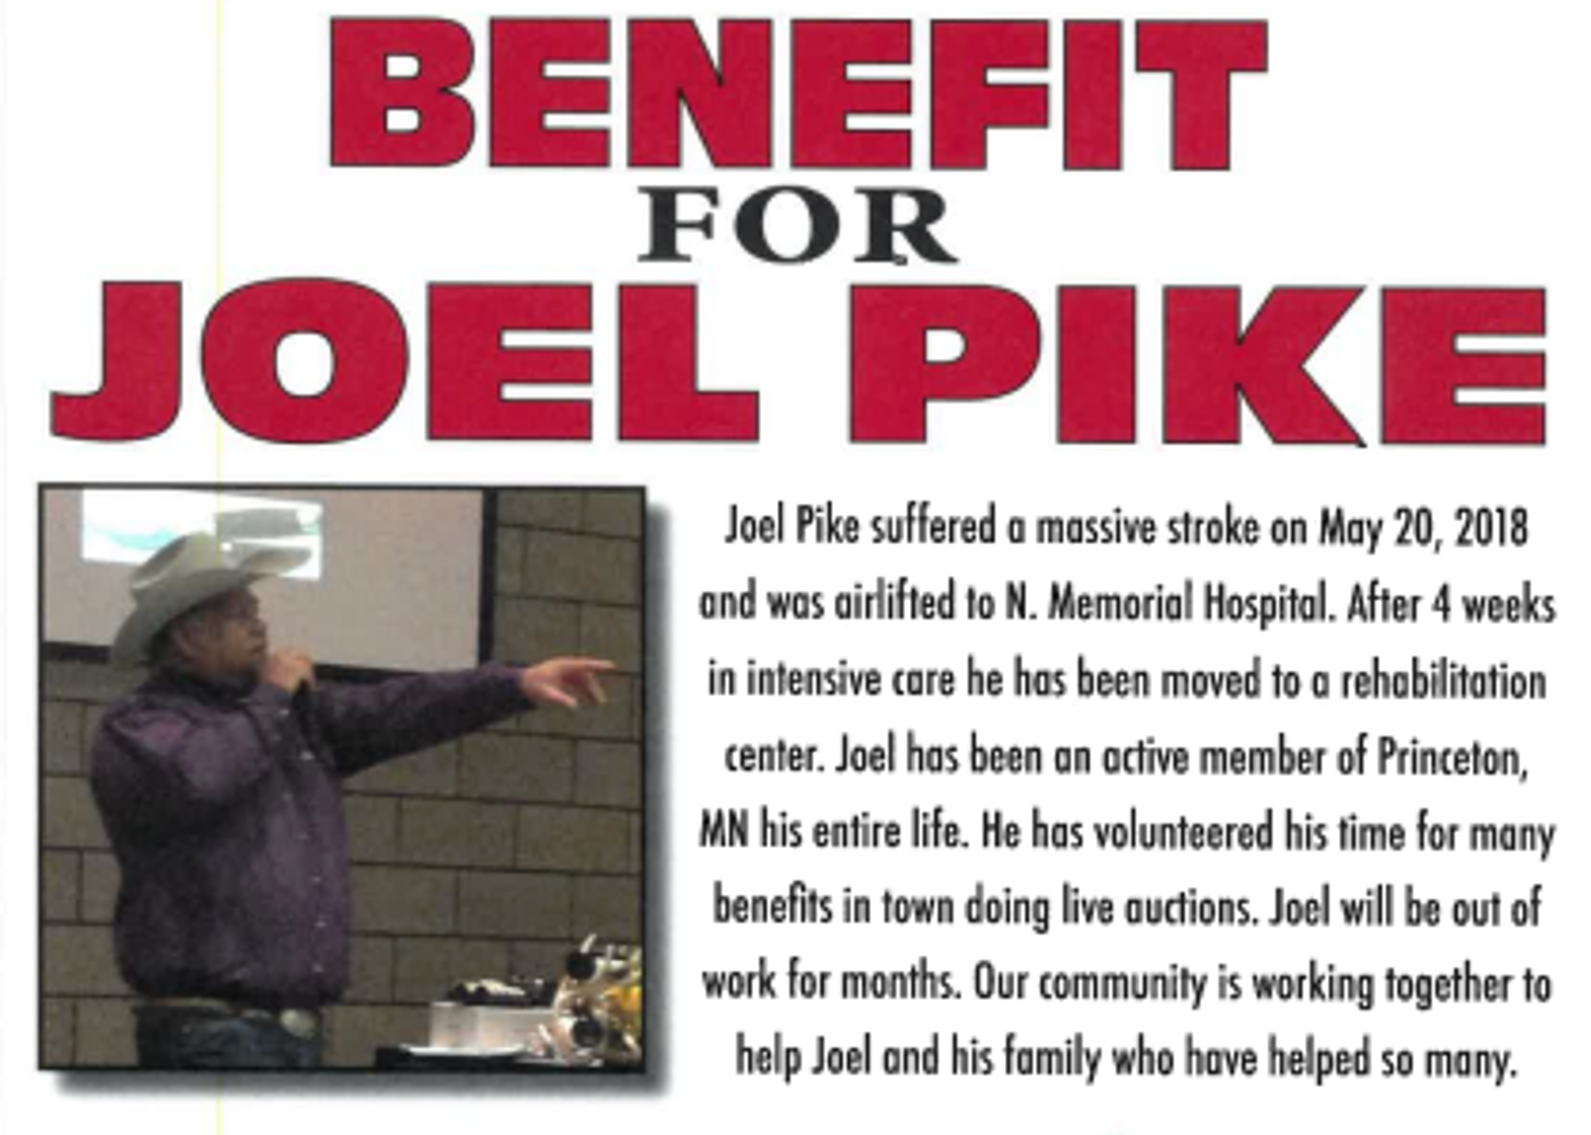 BENEFIT FOR JOEL PIKE